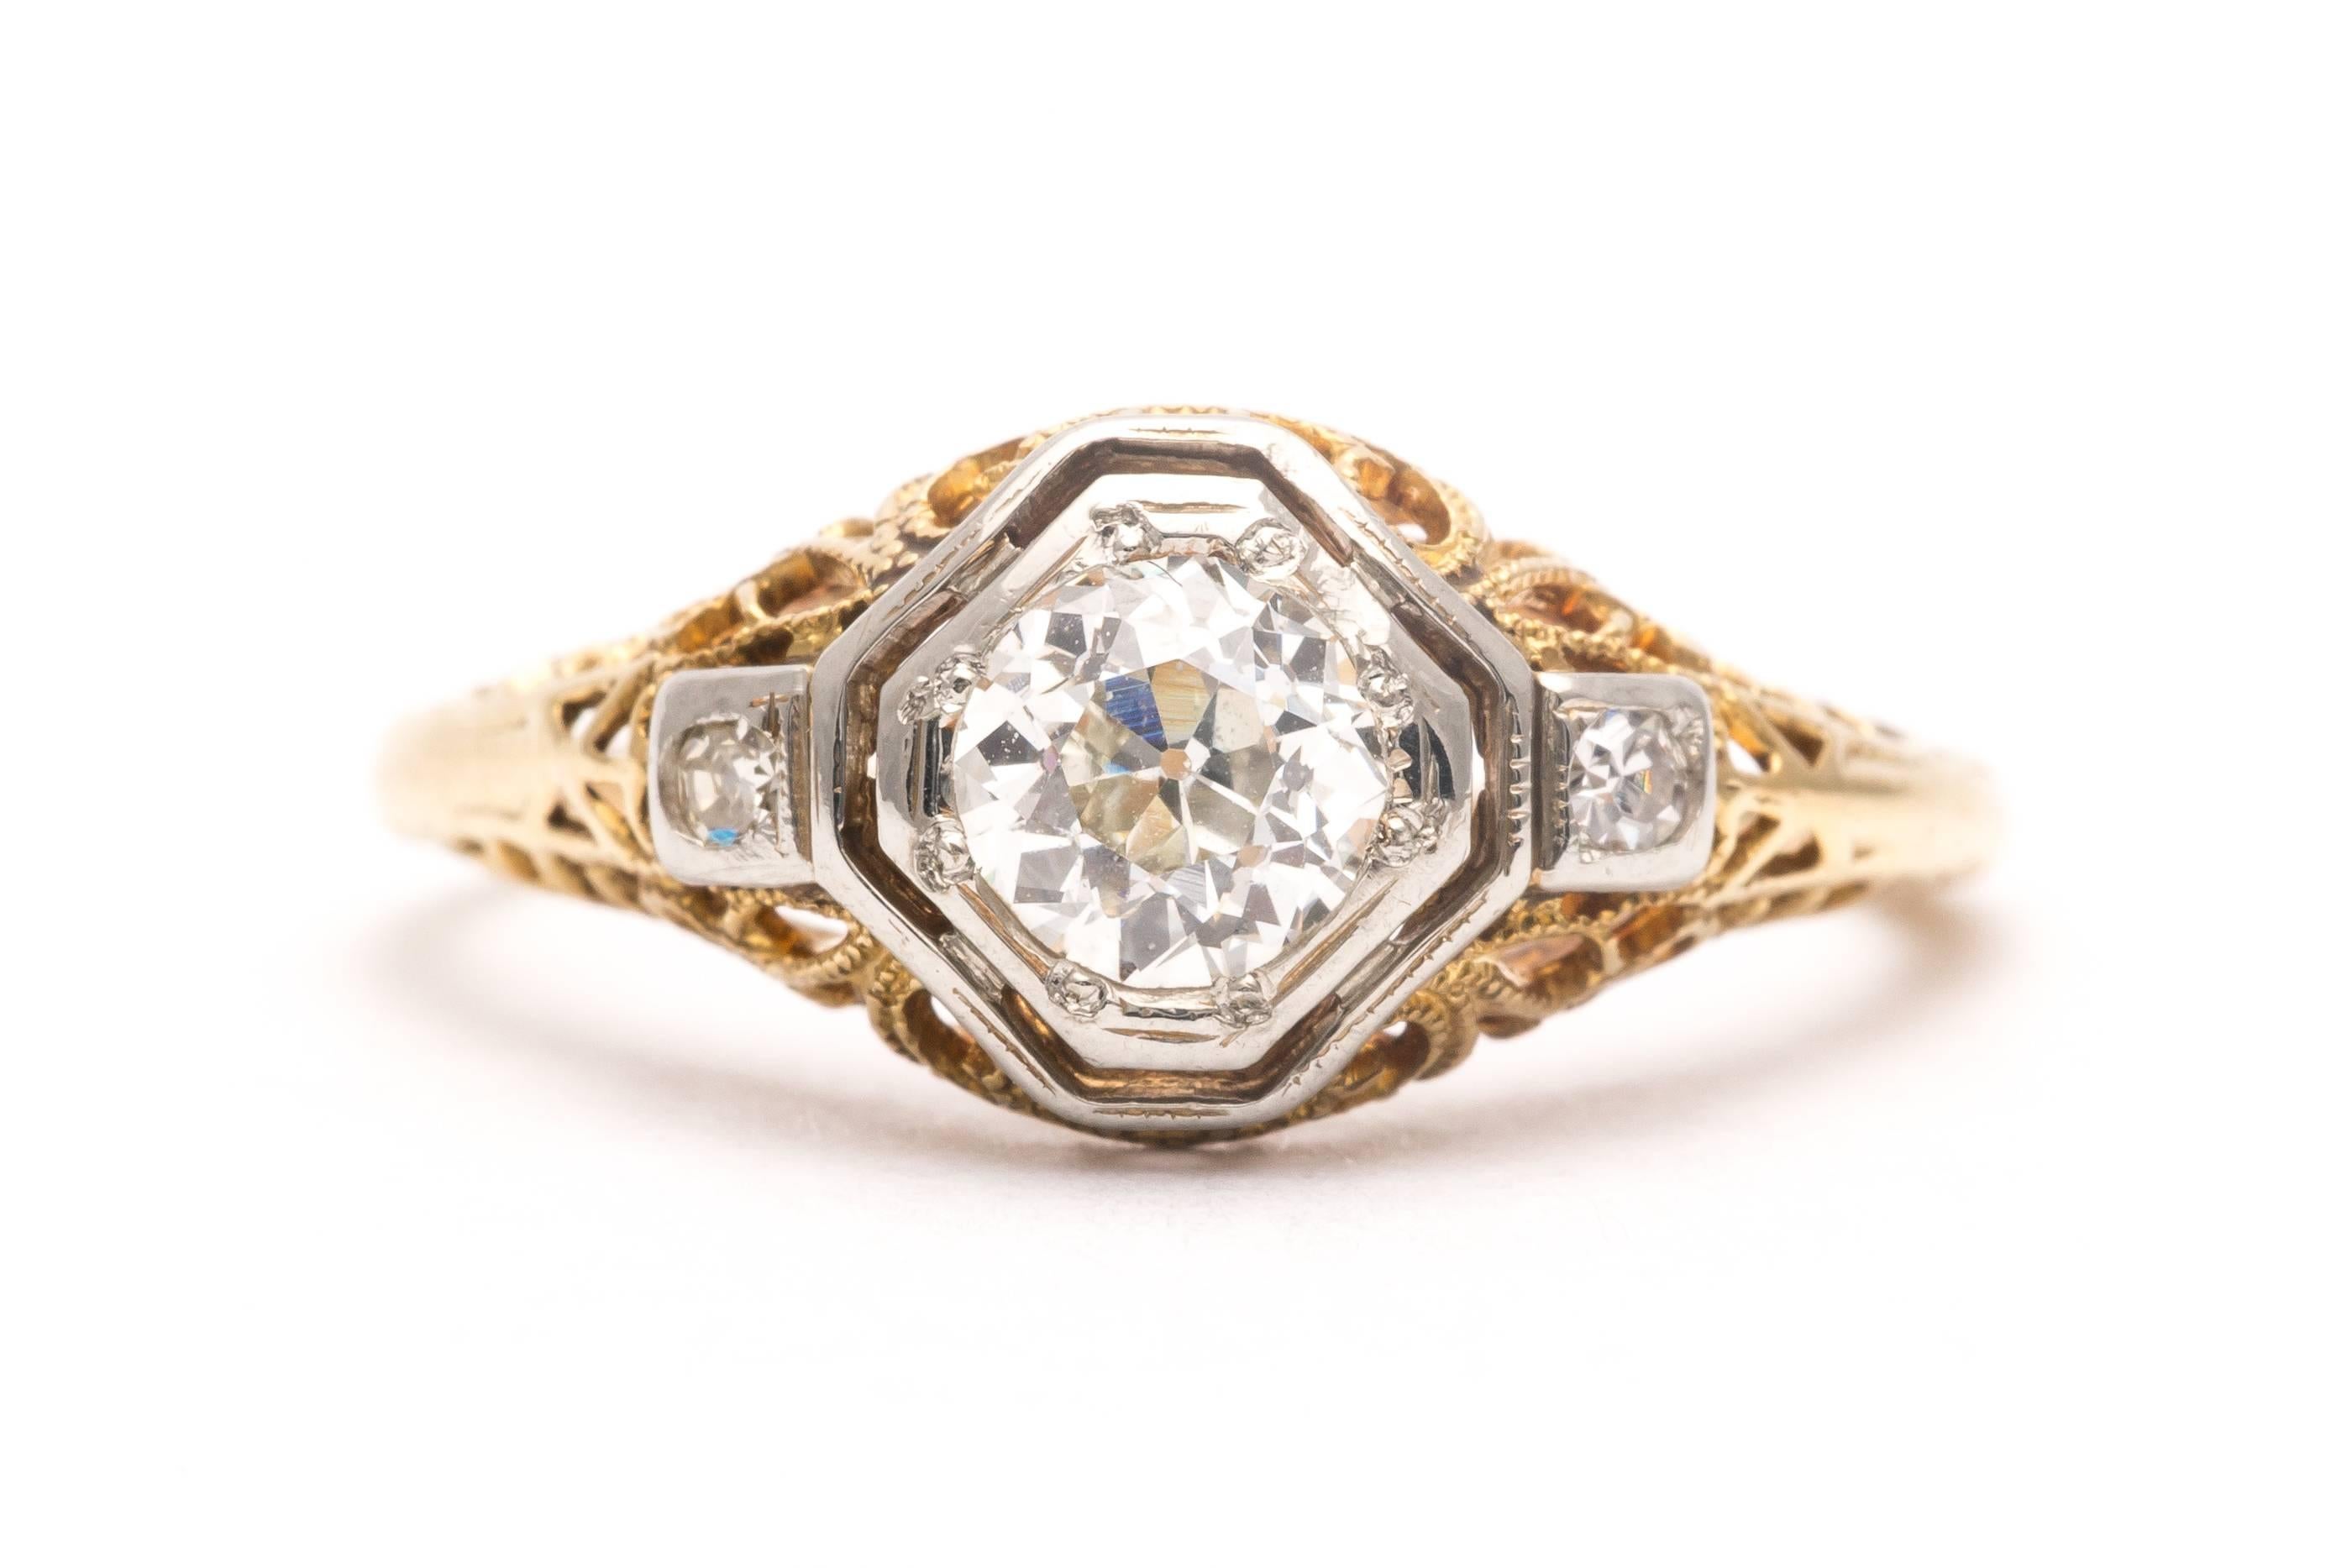 Beacon Hill Jewelers Presents:

A beautiful original Edwardian period diamond engagement ring in platinum and 14 karat yellow gold. Centered by an old European cut diamond this ring features a platinum mount to secure the three diamonds, along